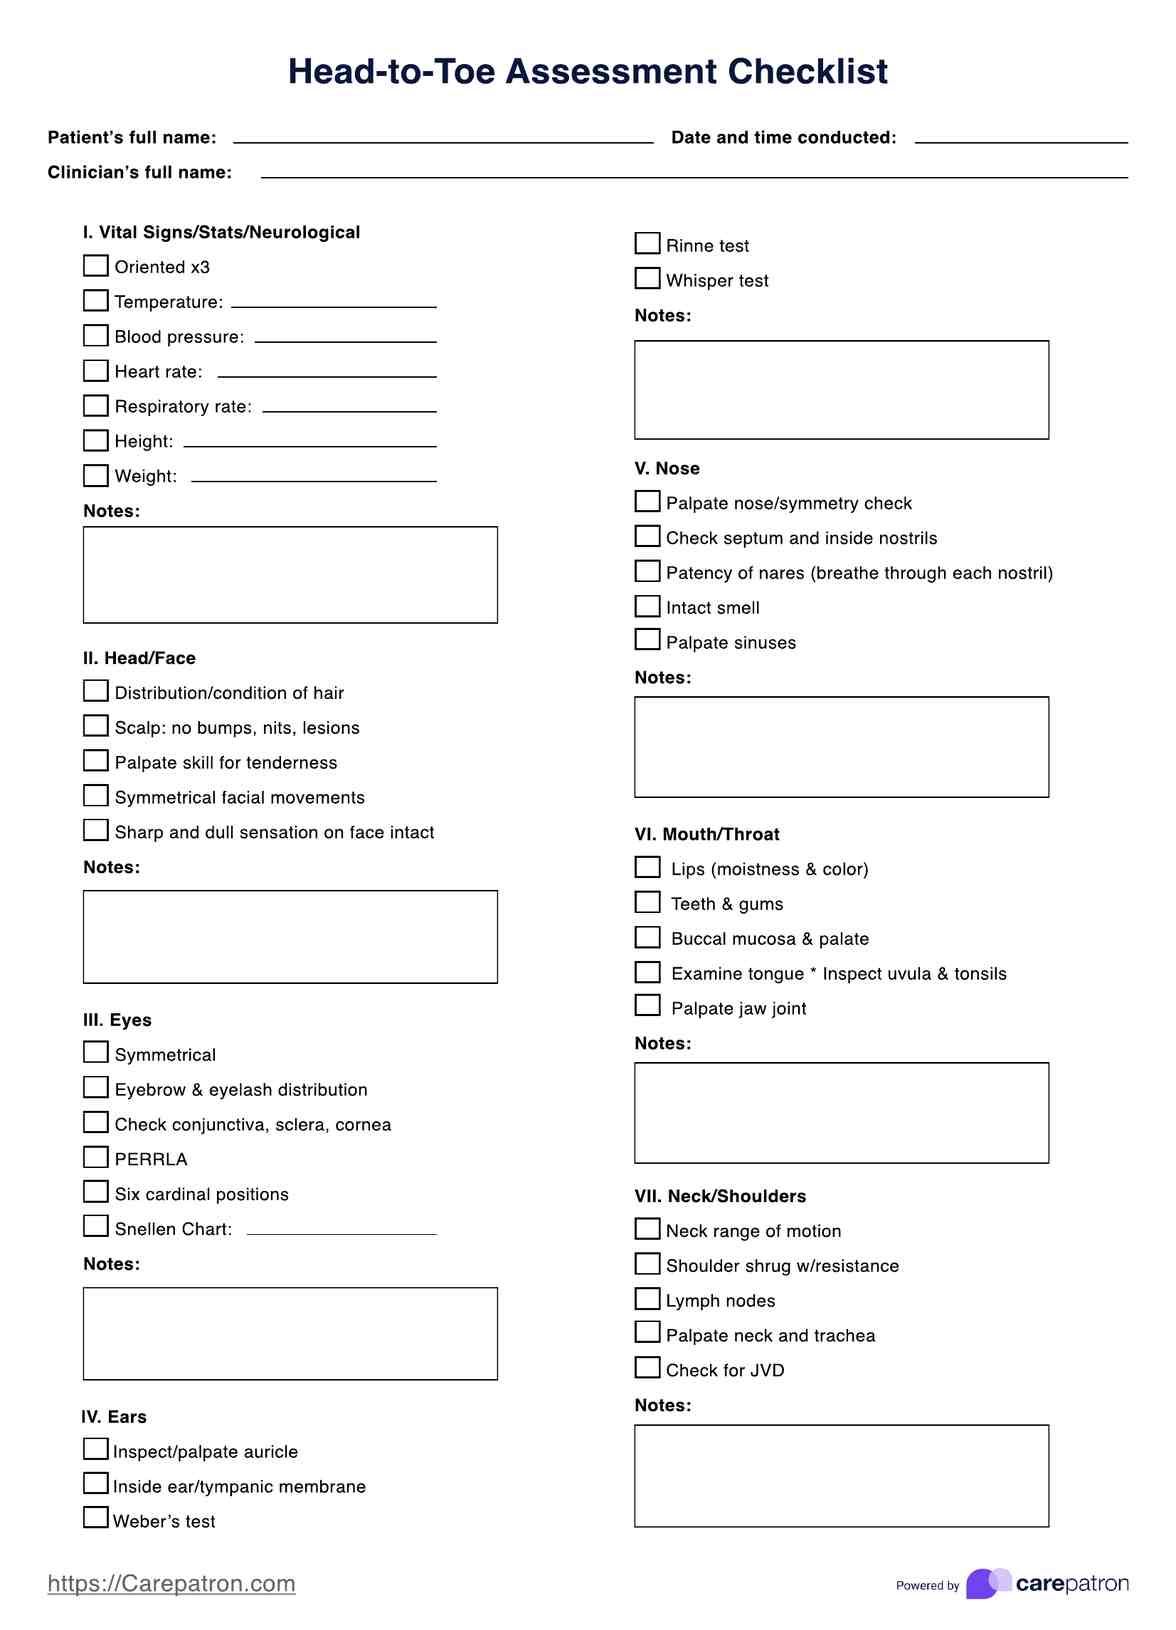 Head-to-Toe Assessment Checklist PDF Example